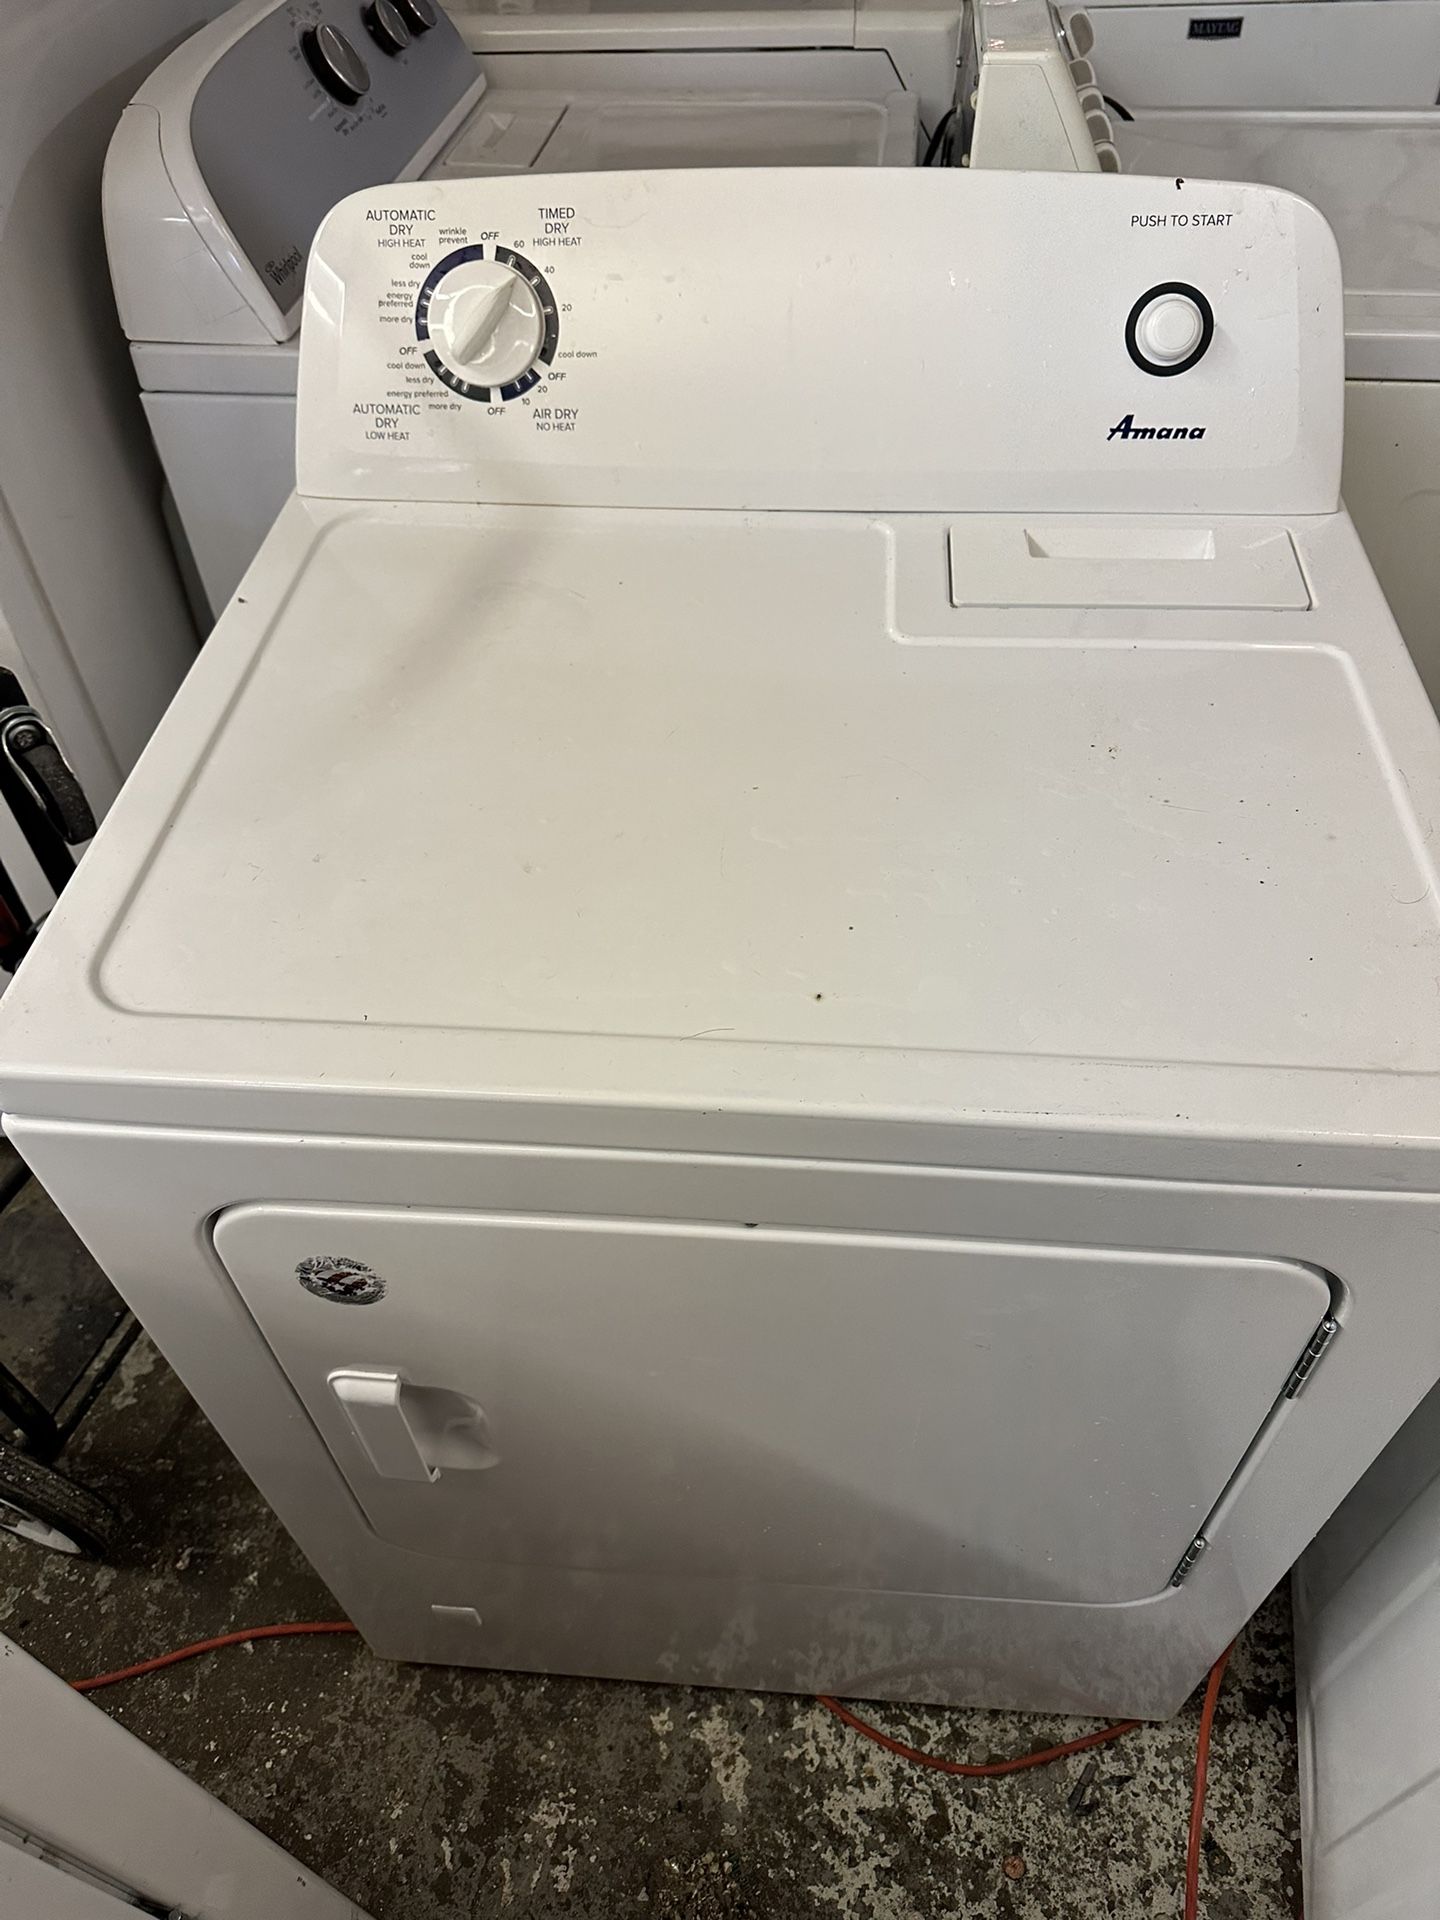 Gás dryer in excellent working condition